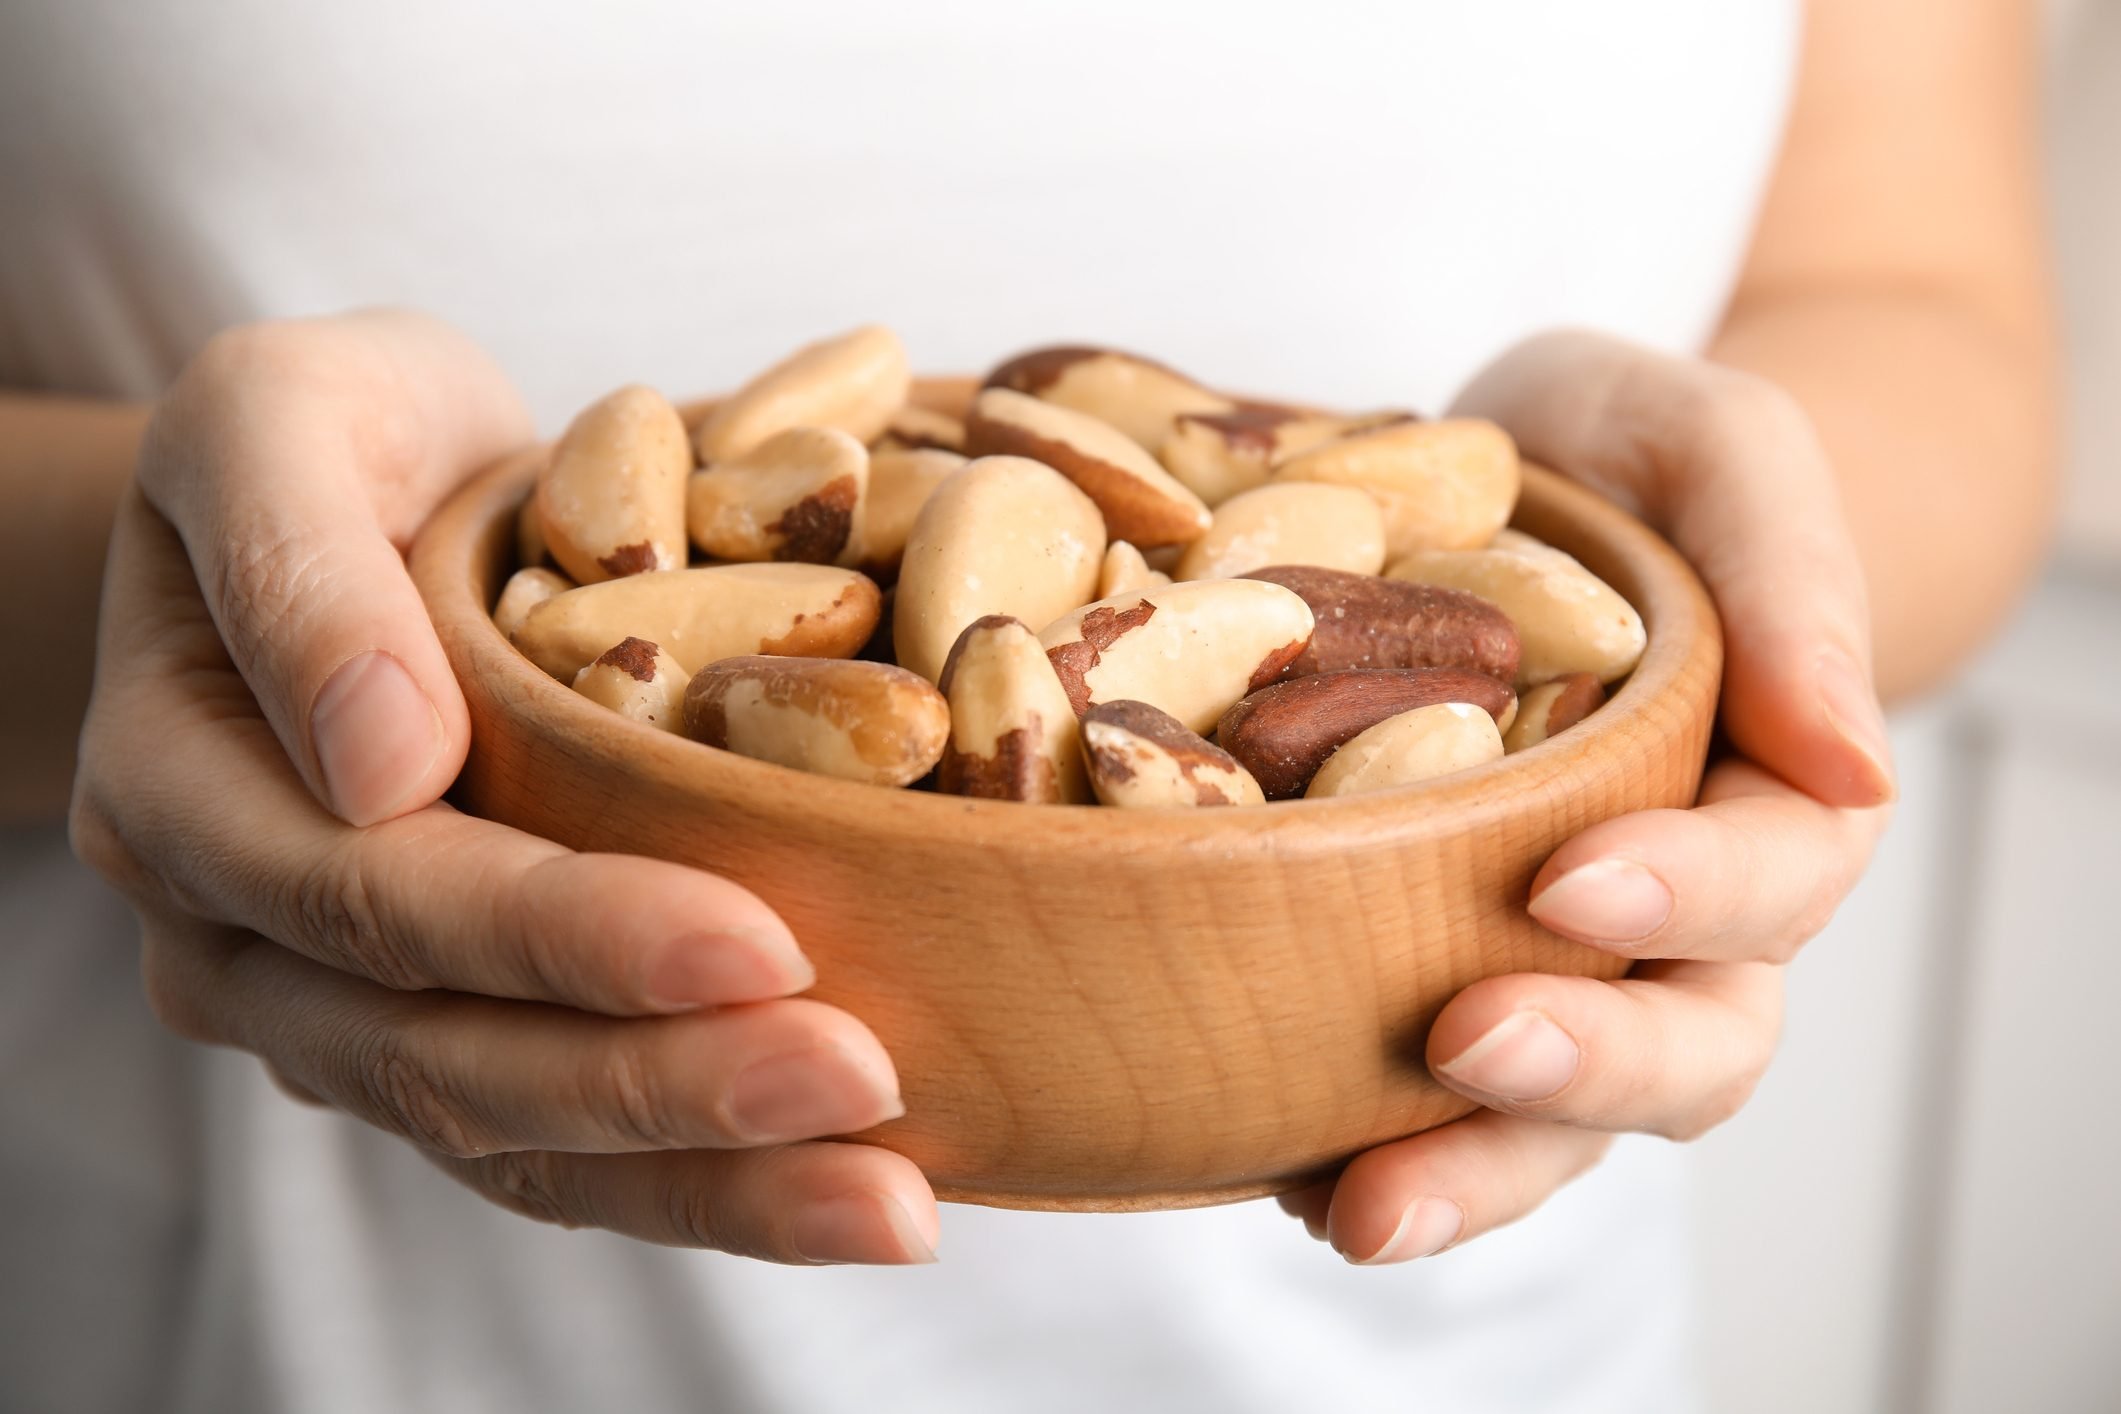 Are Brazil Nuts Good for You? Here's What Nutritionists Say